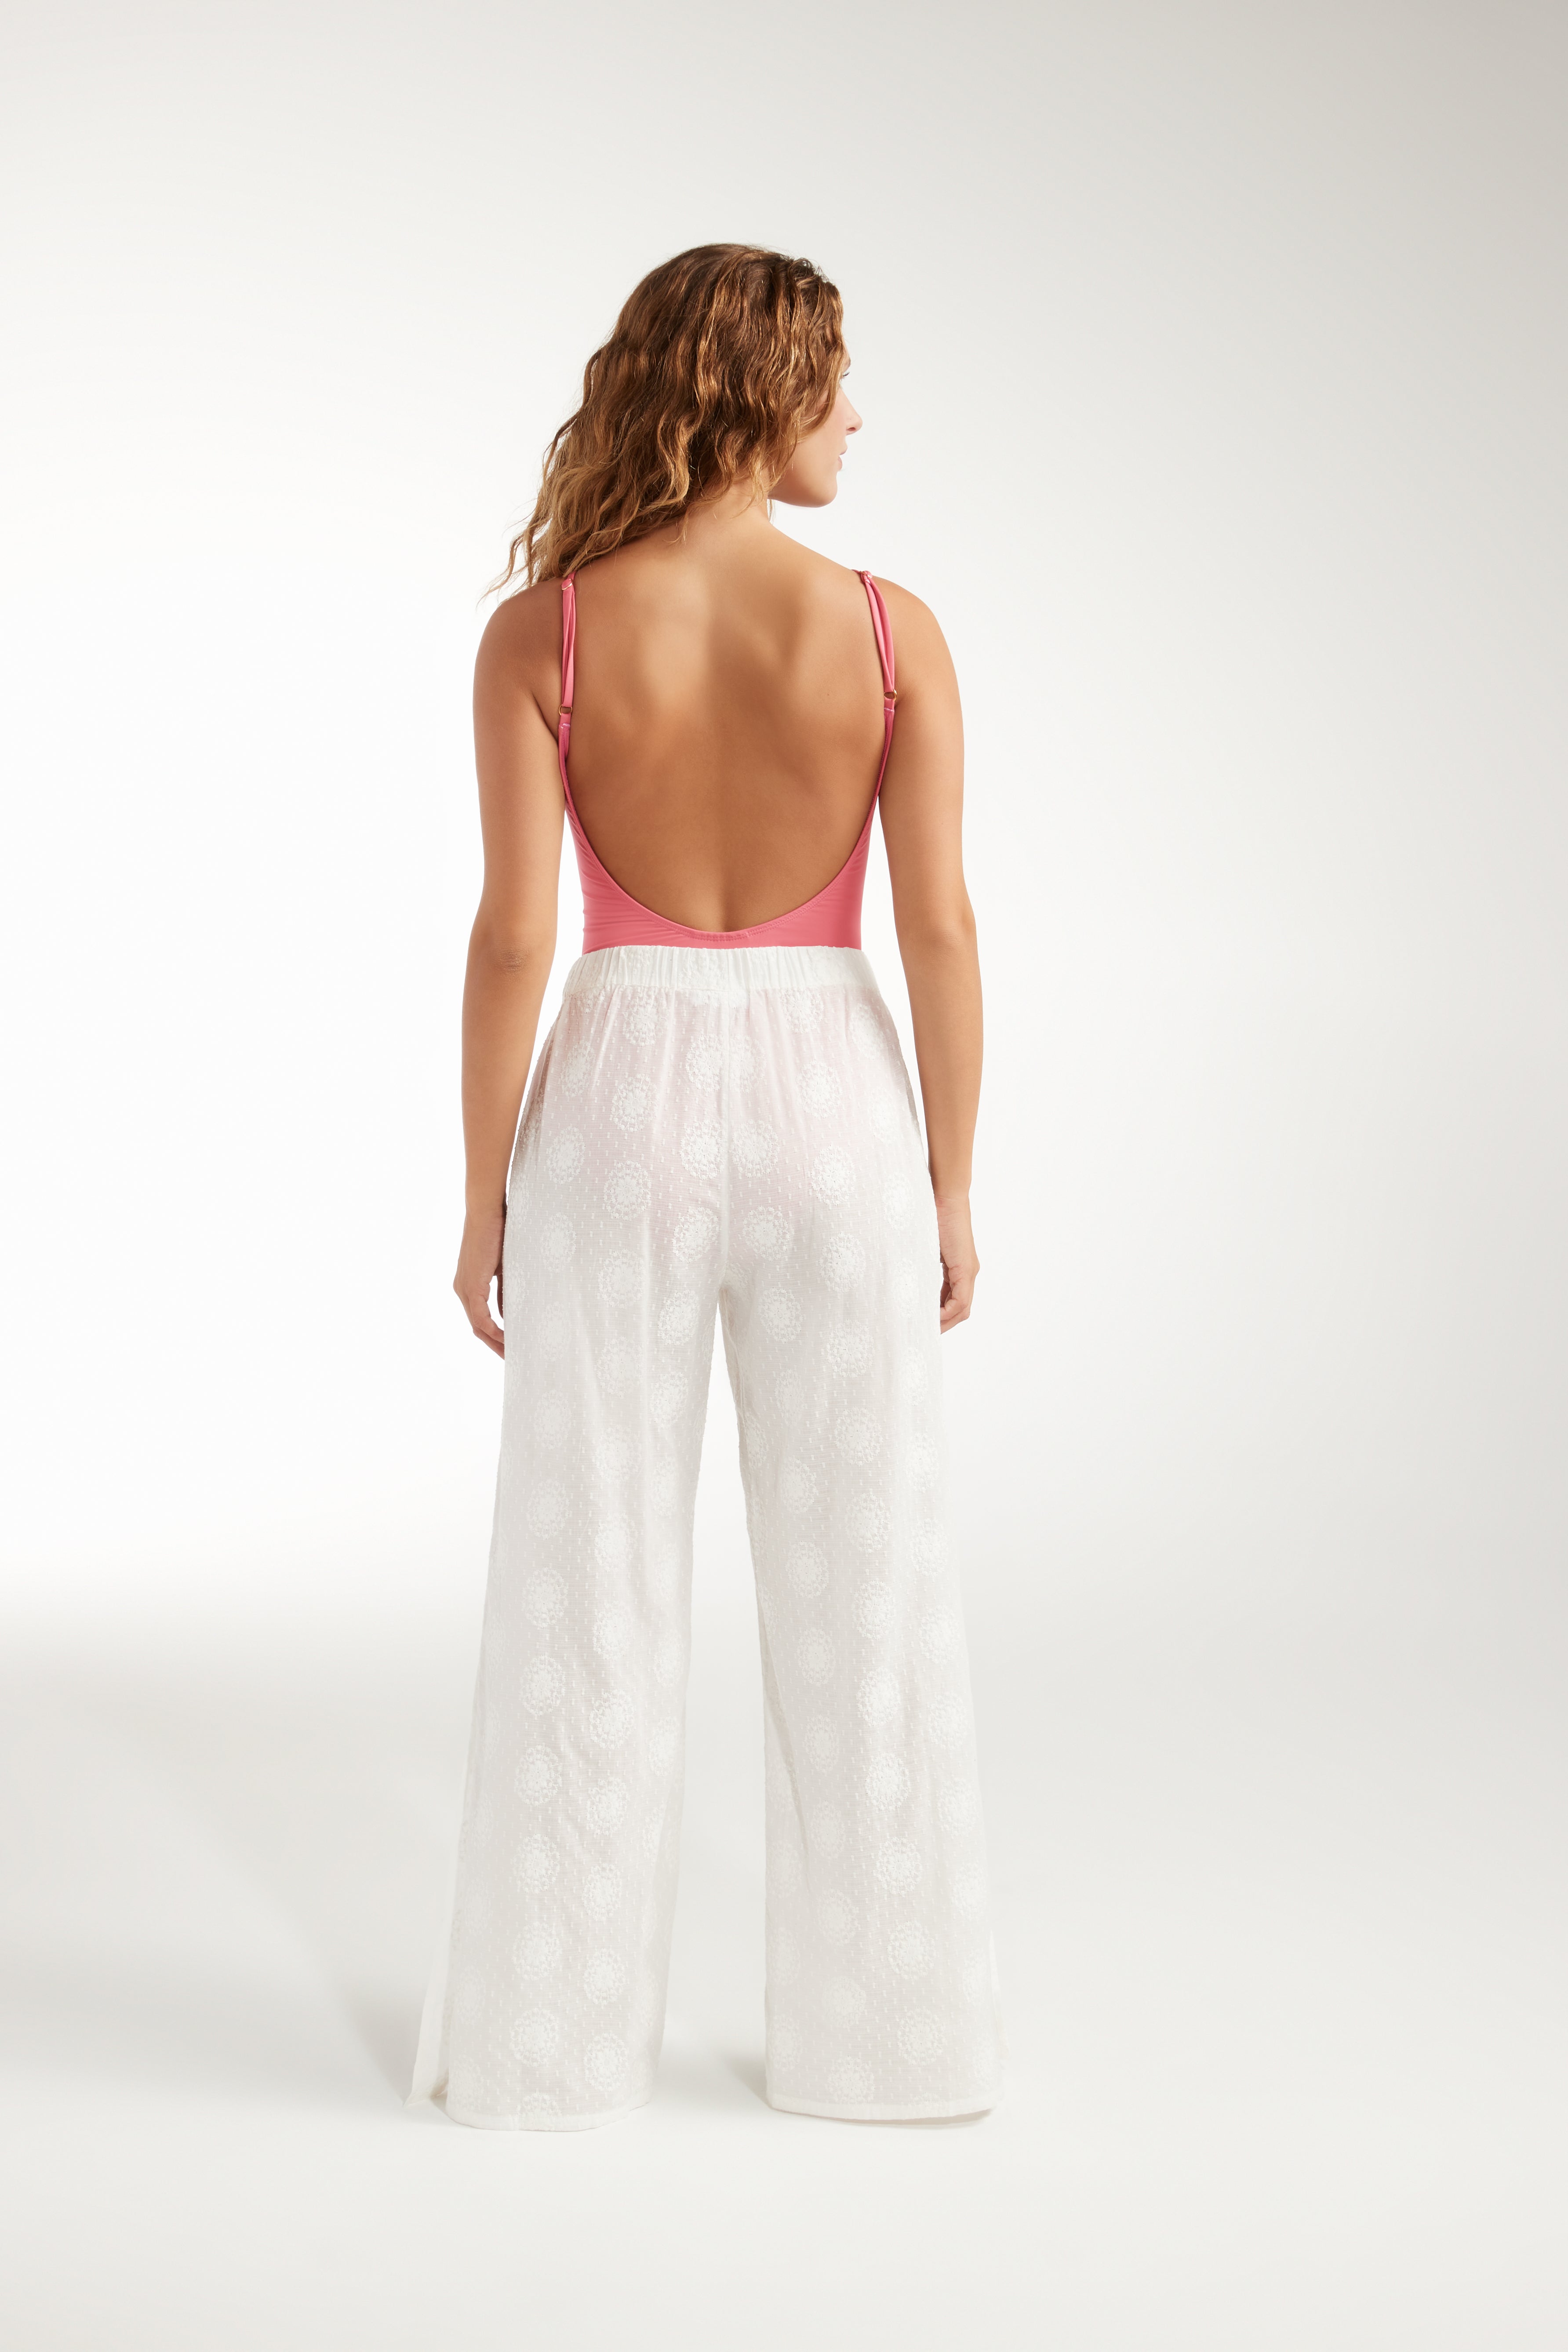 Eve Gaucho Pant by Hermoza